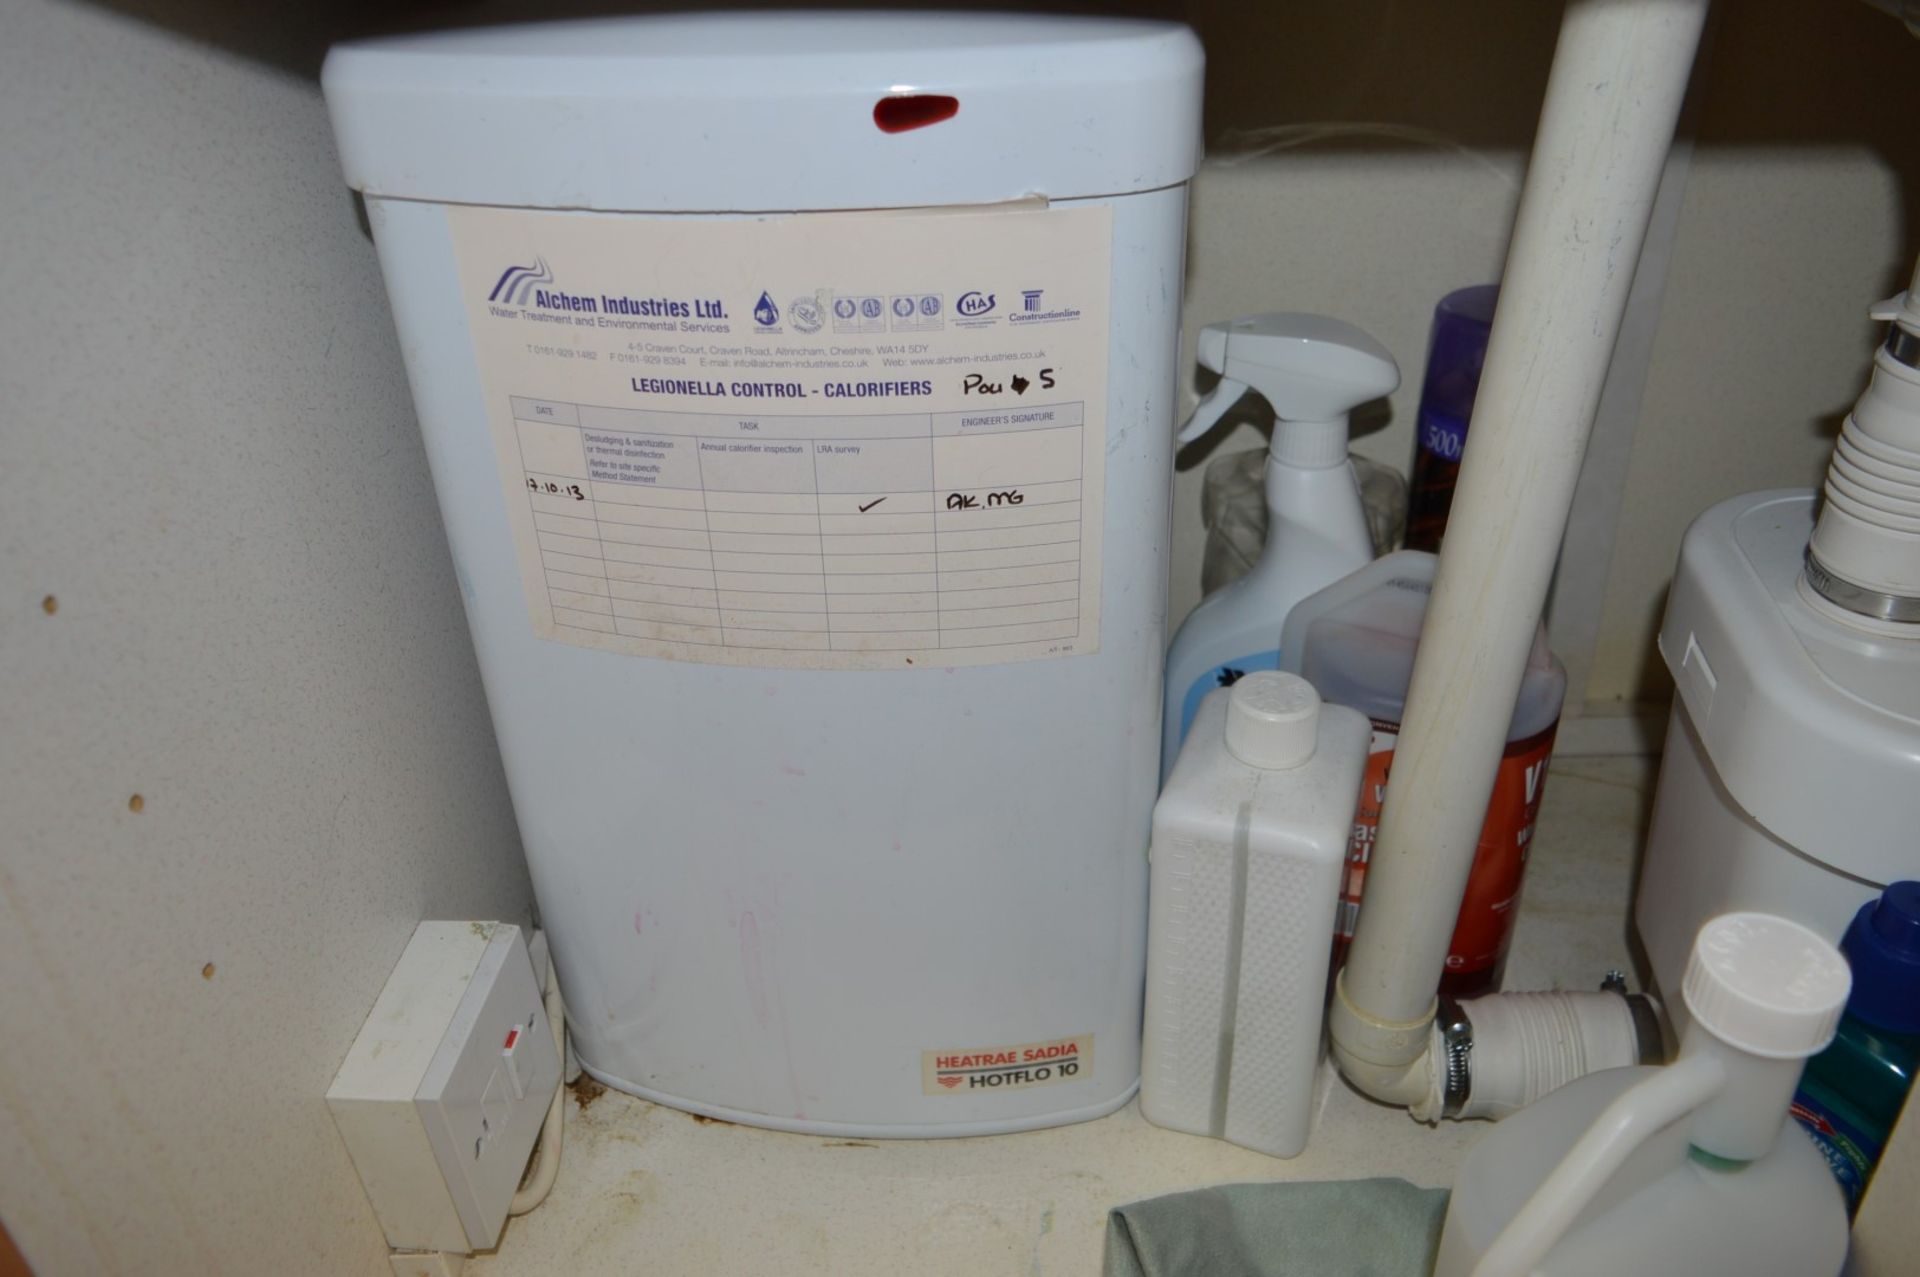 1 x Heatrae Sadia Hotflo 10 Electric Unvented Water Heater - CL400 - Already Removed Ready For - Image 2 of 2